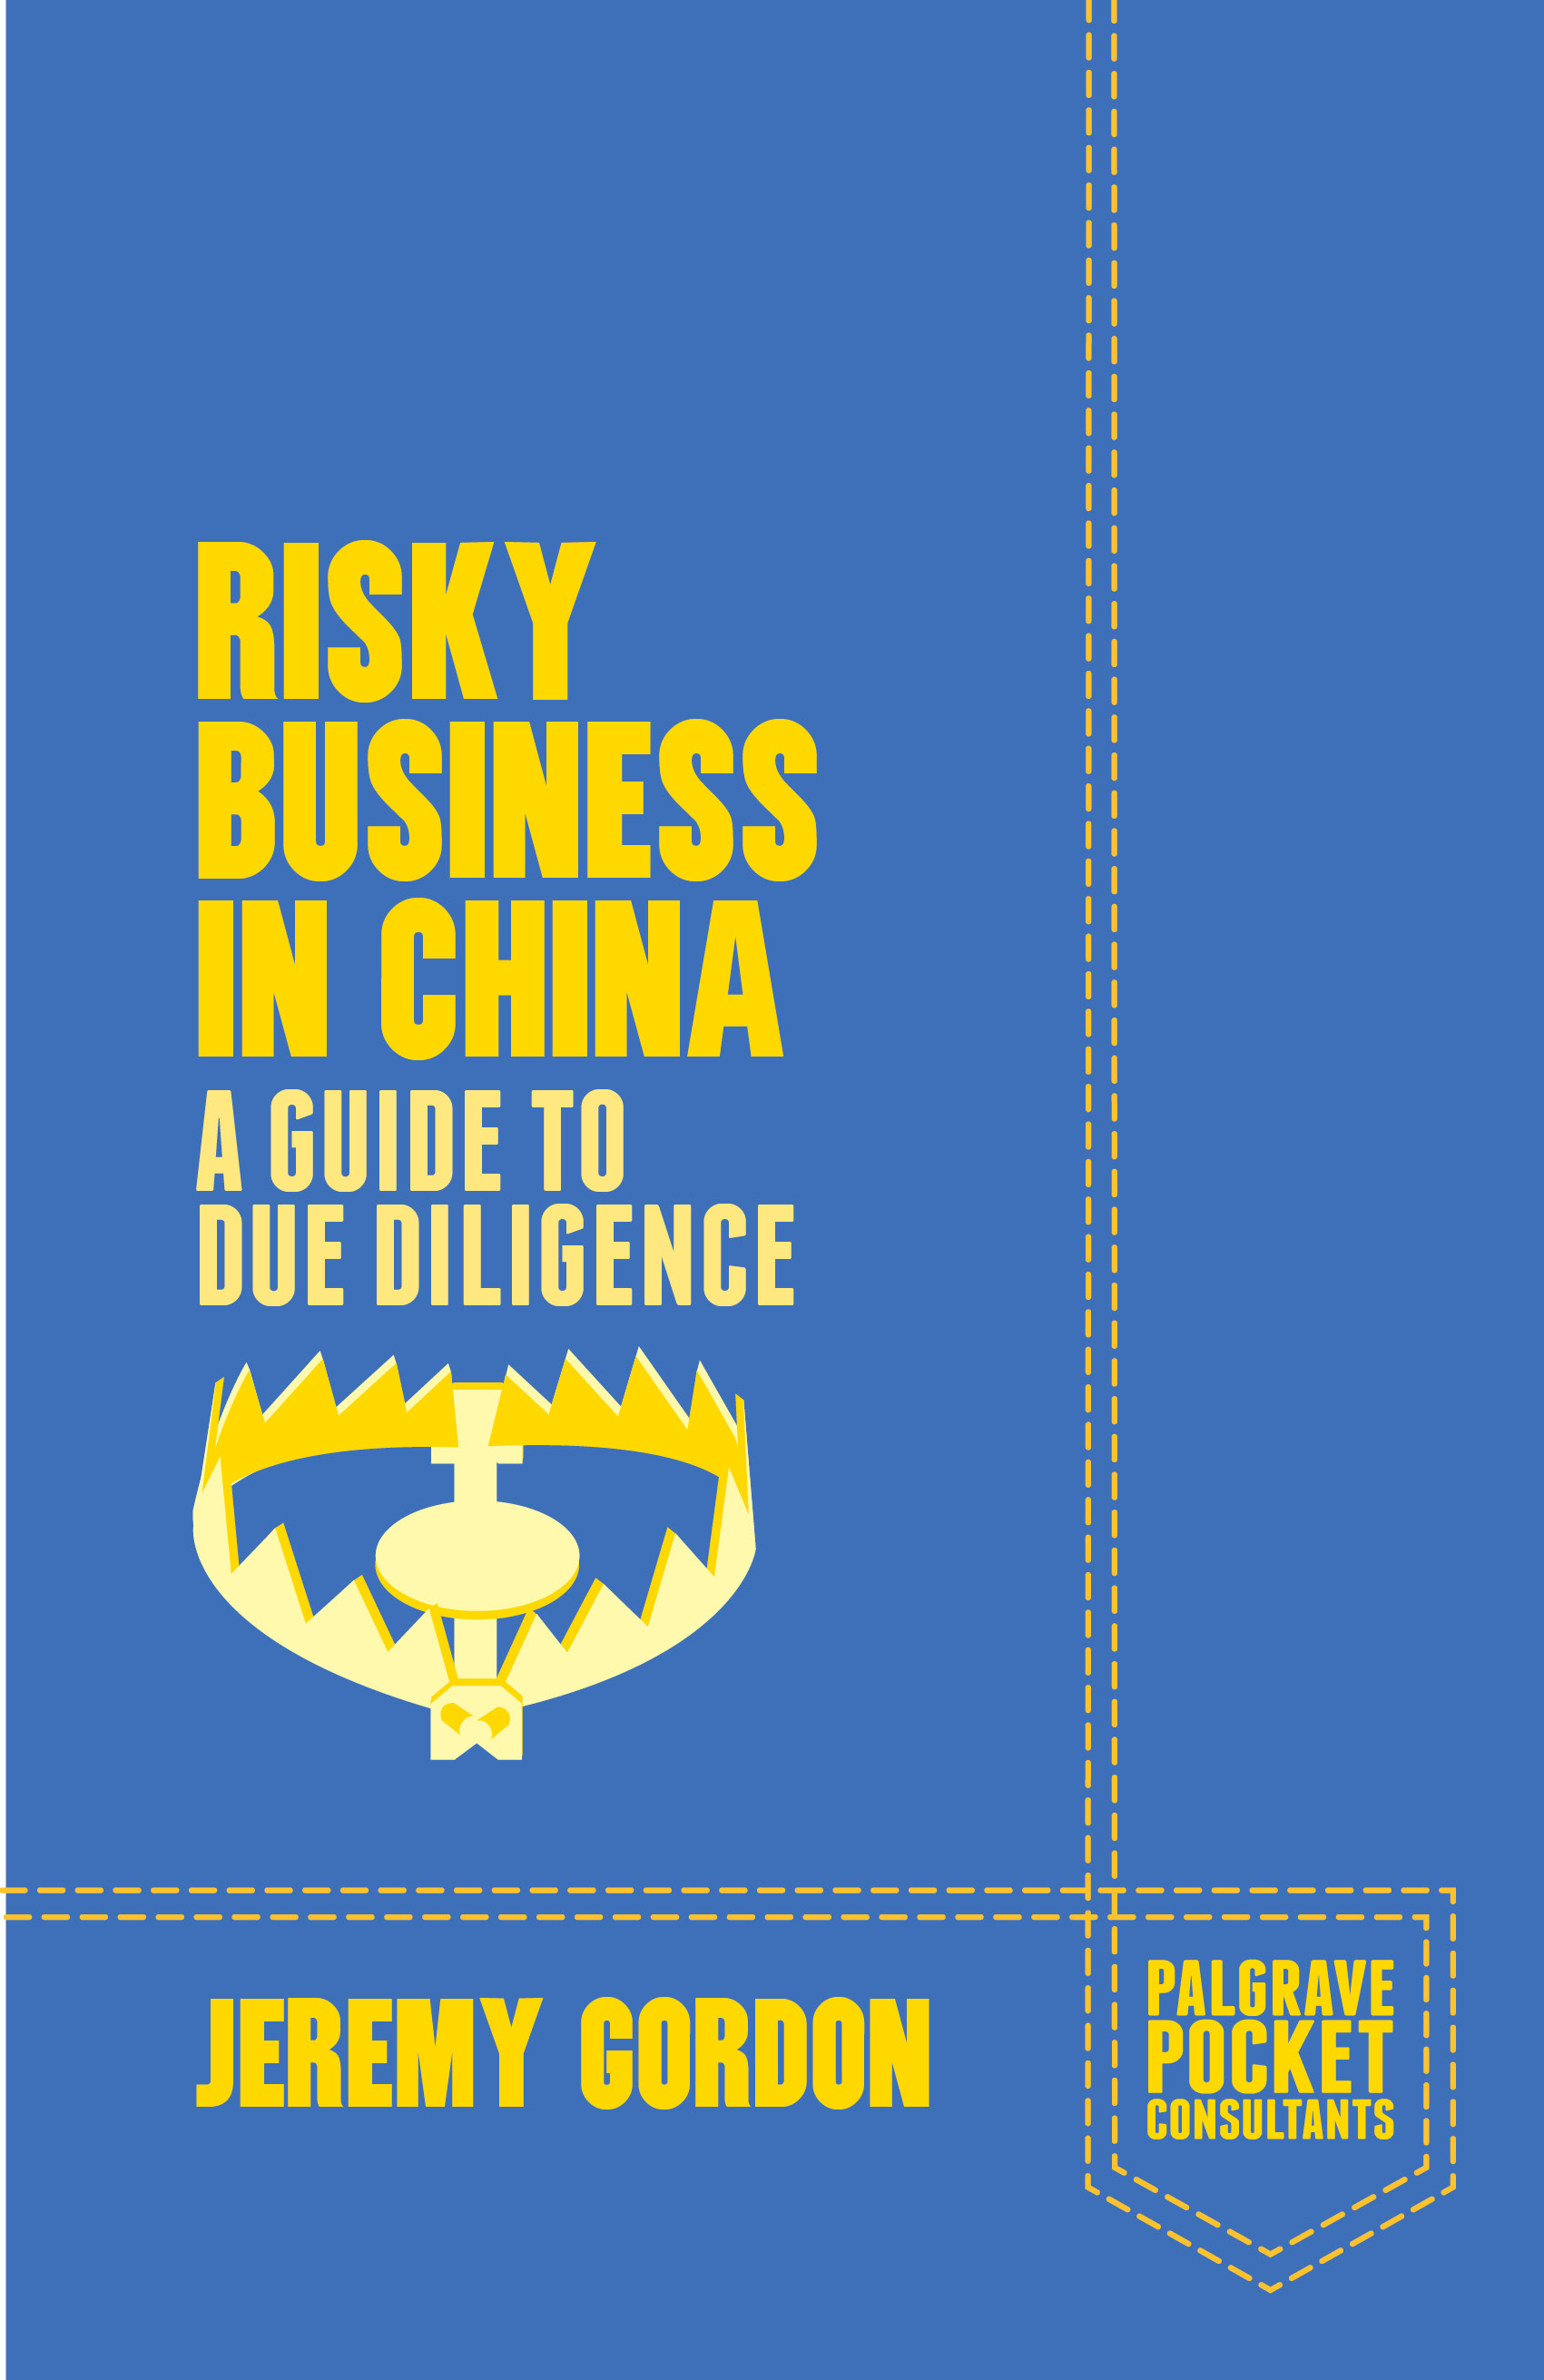 Jeremy Gordon interviewed about China risk on the BBC